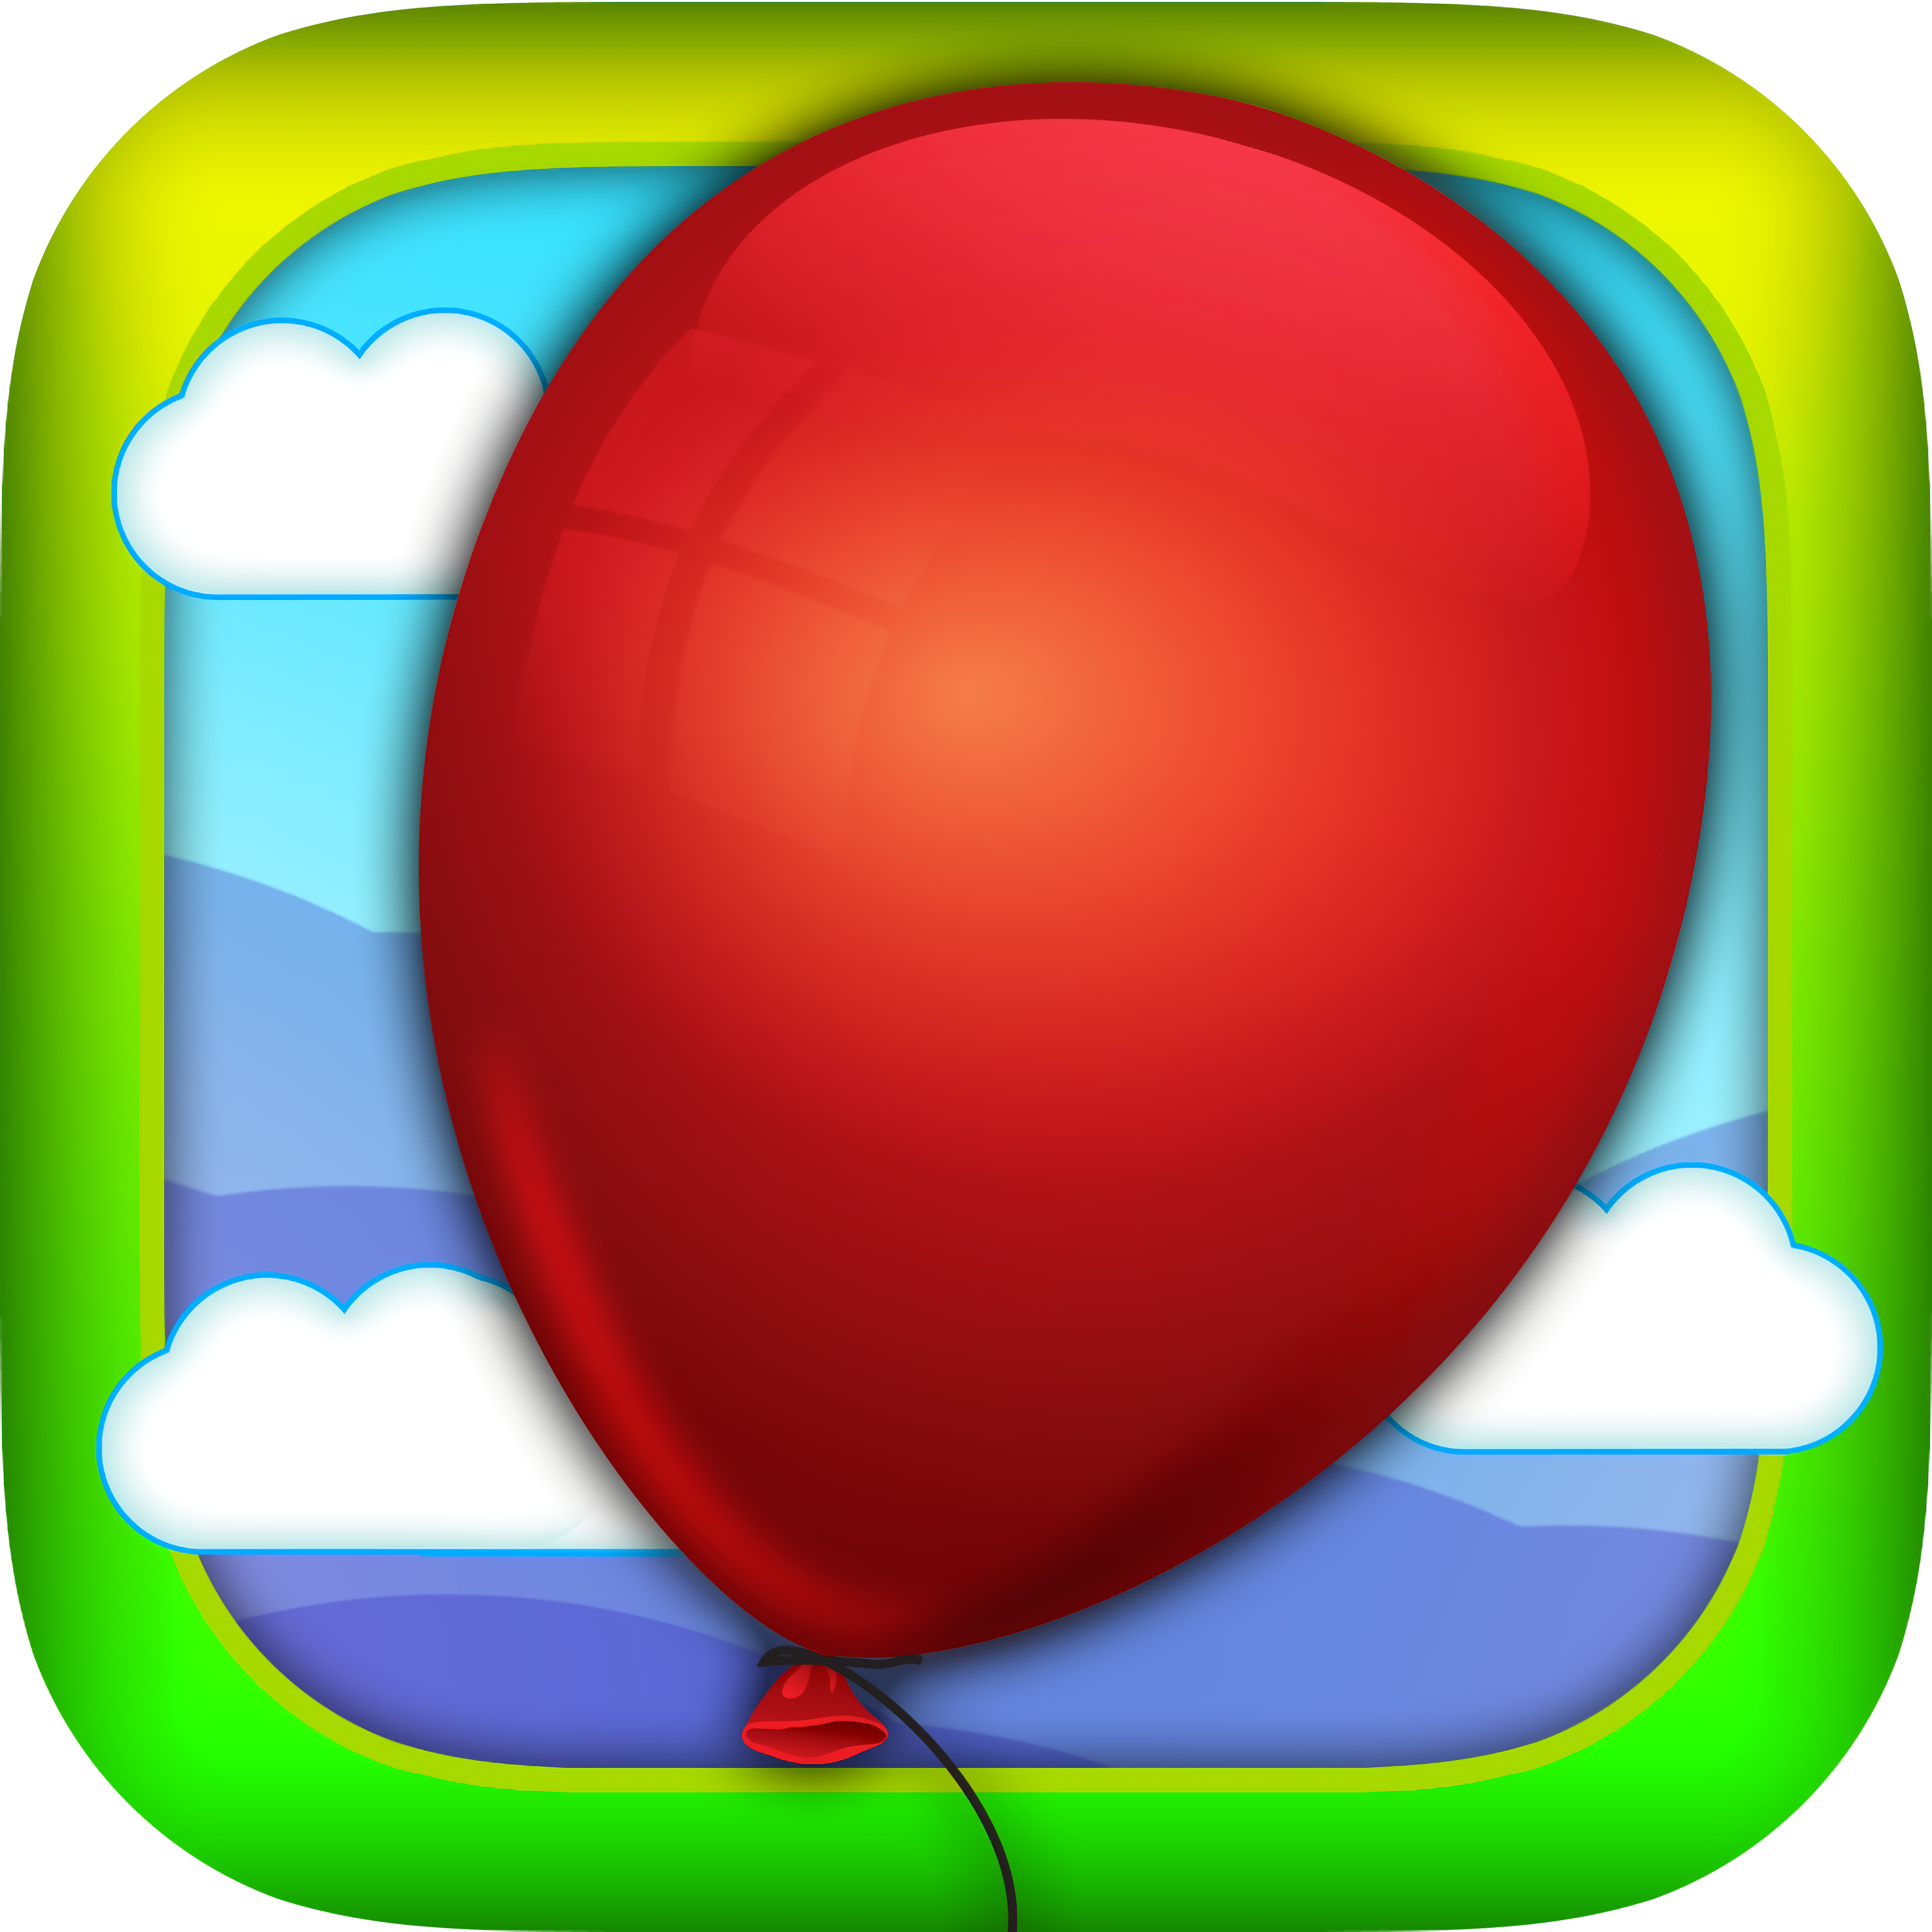 Bloons-spil